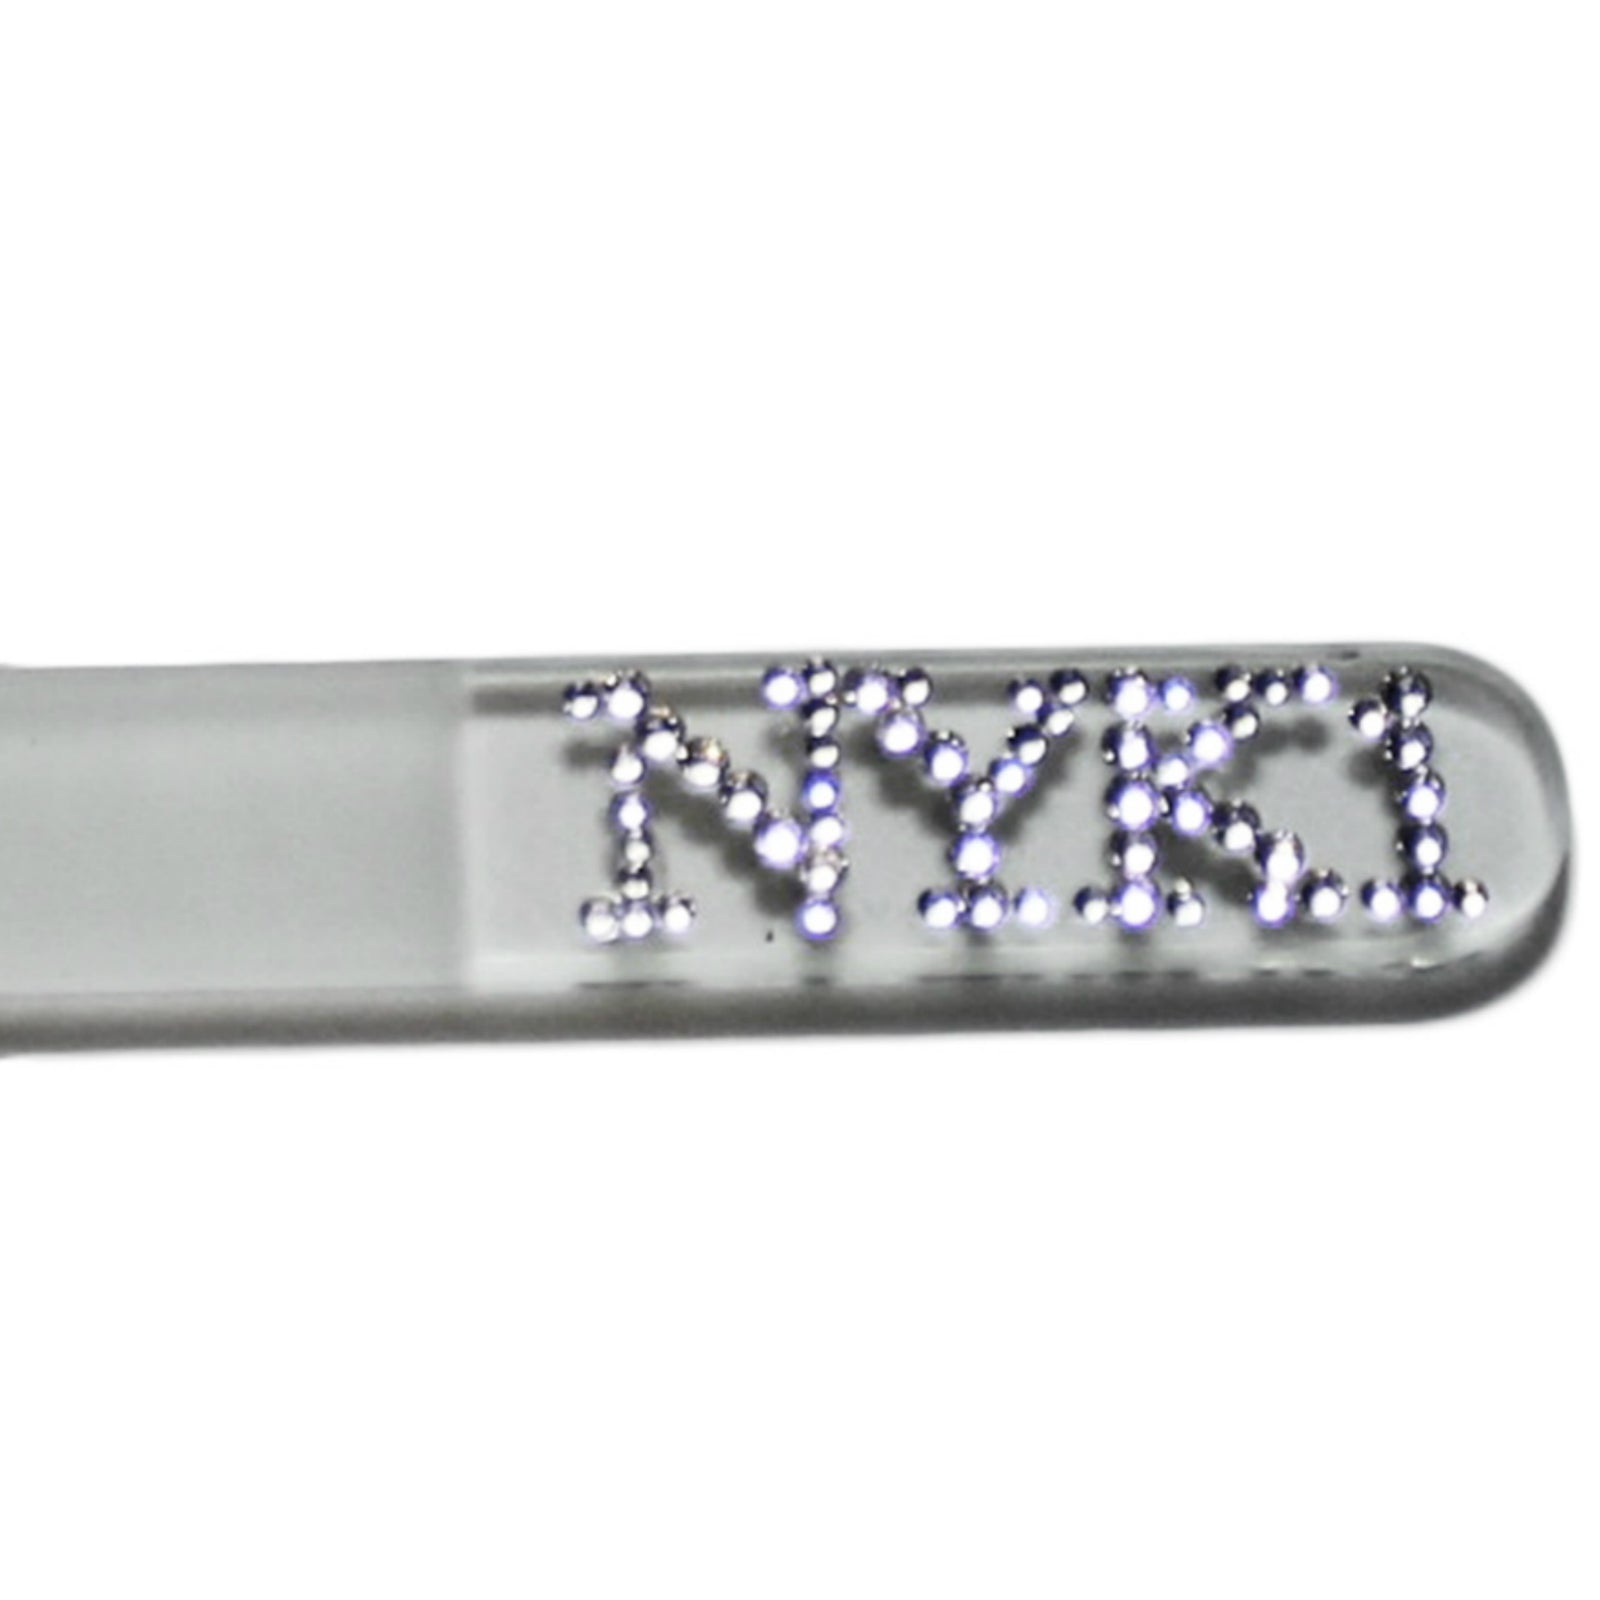 NYK1 Best Swarovski Crystal Glass Nail File with Carry Case - Excellent Gift 